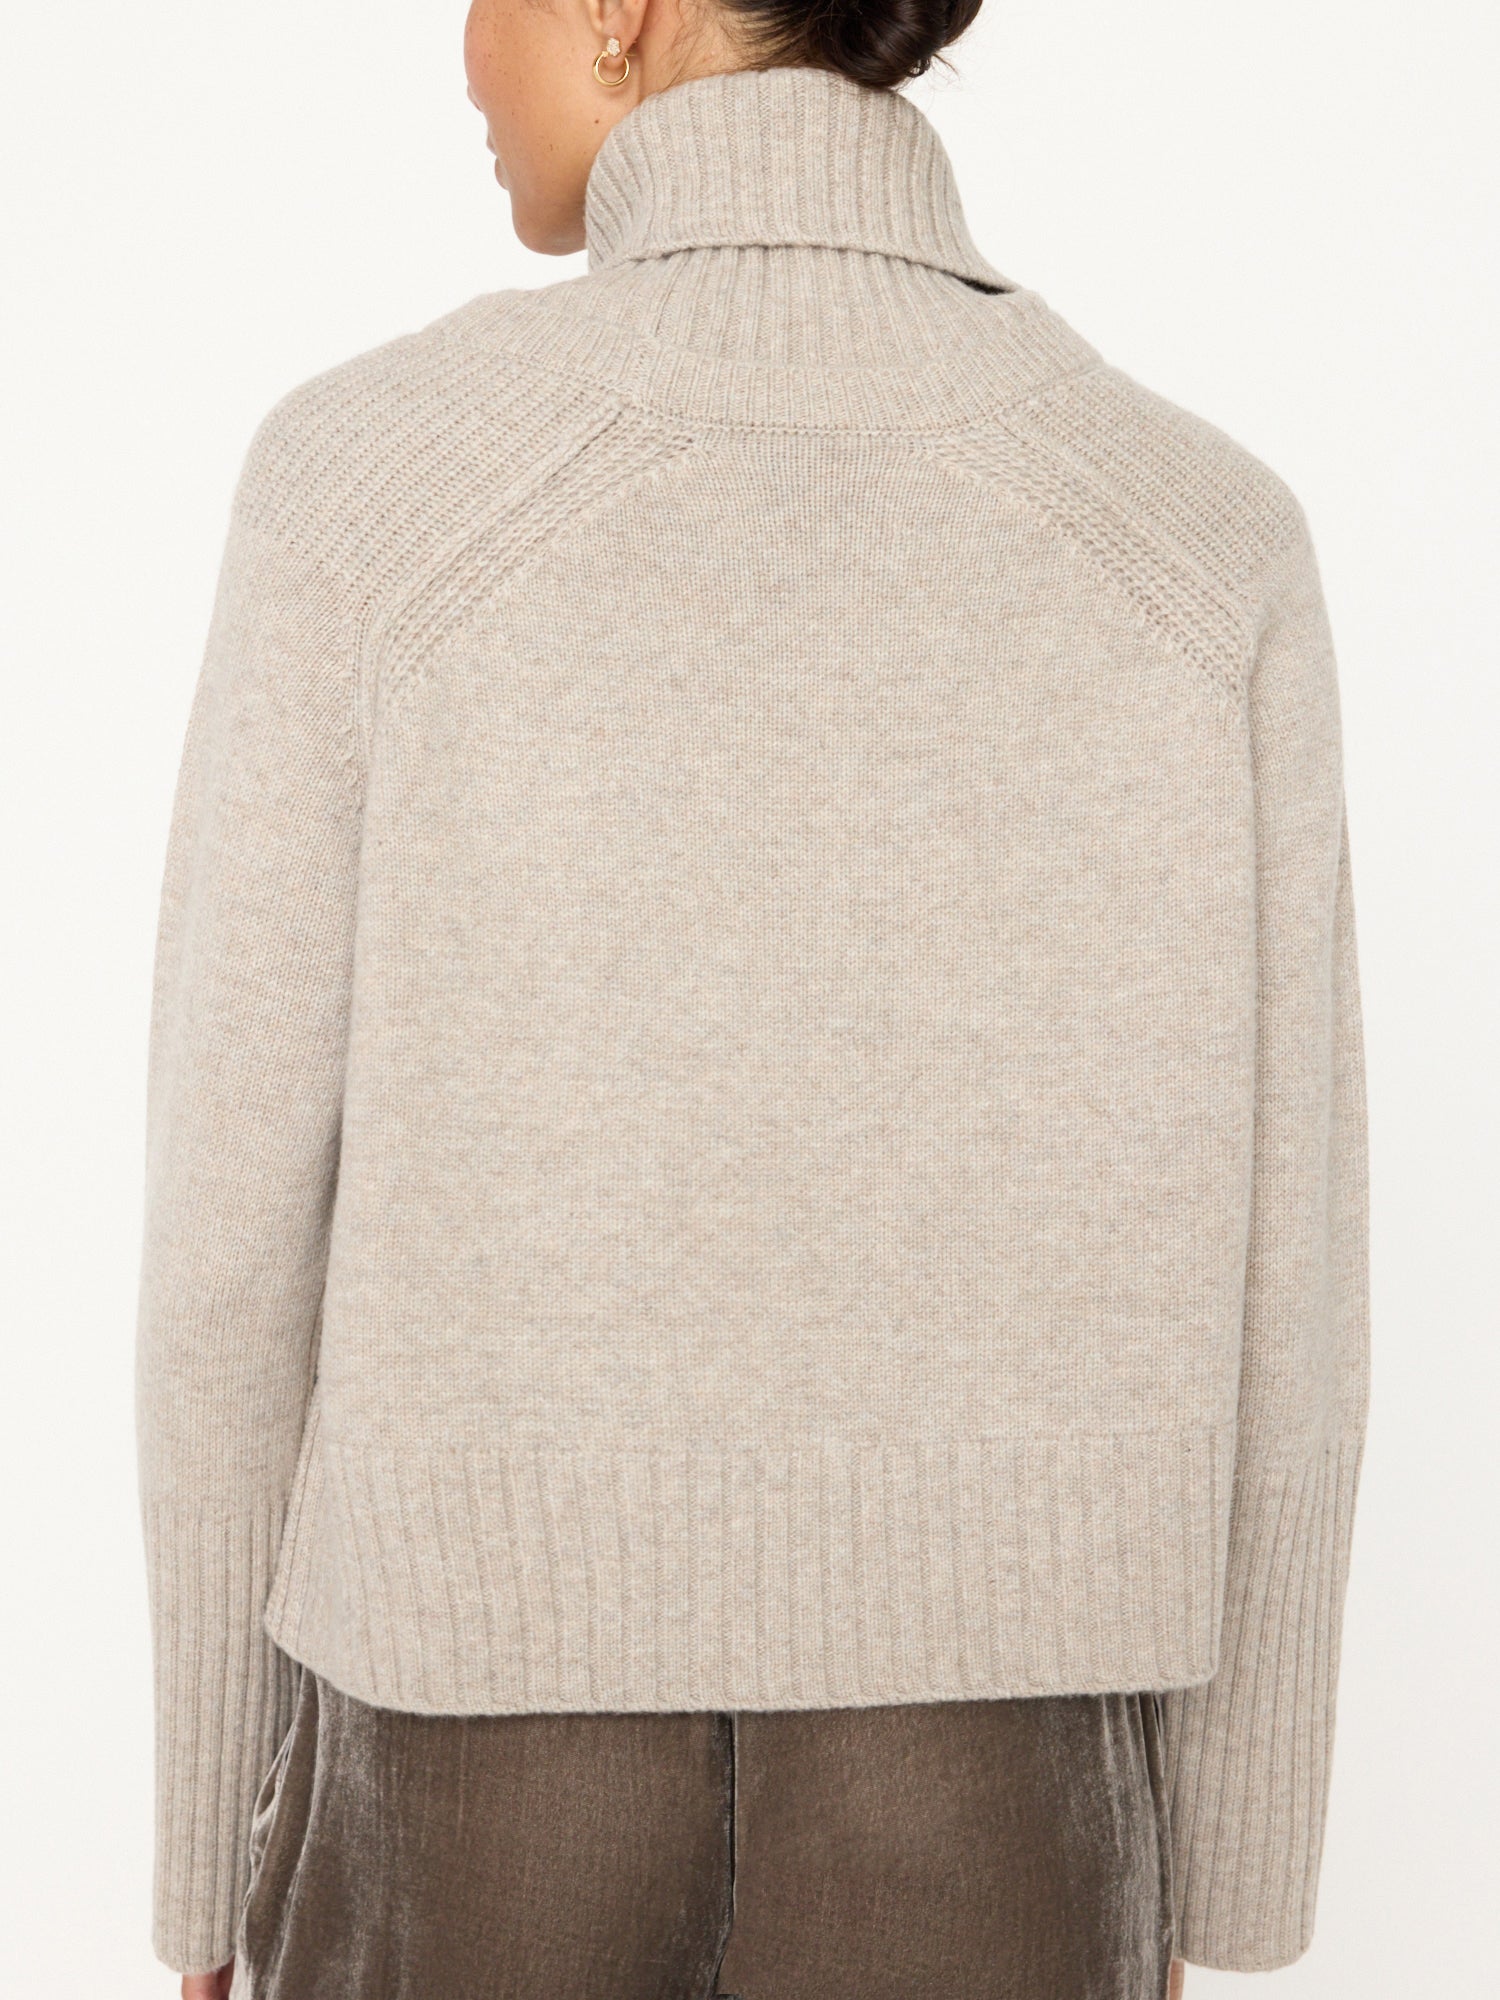 Orion cashmere-wool light grey turtleneck sweater back view